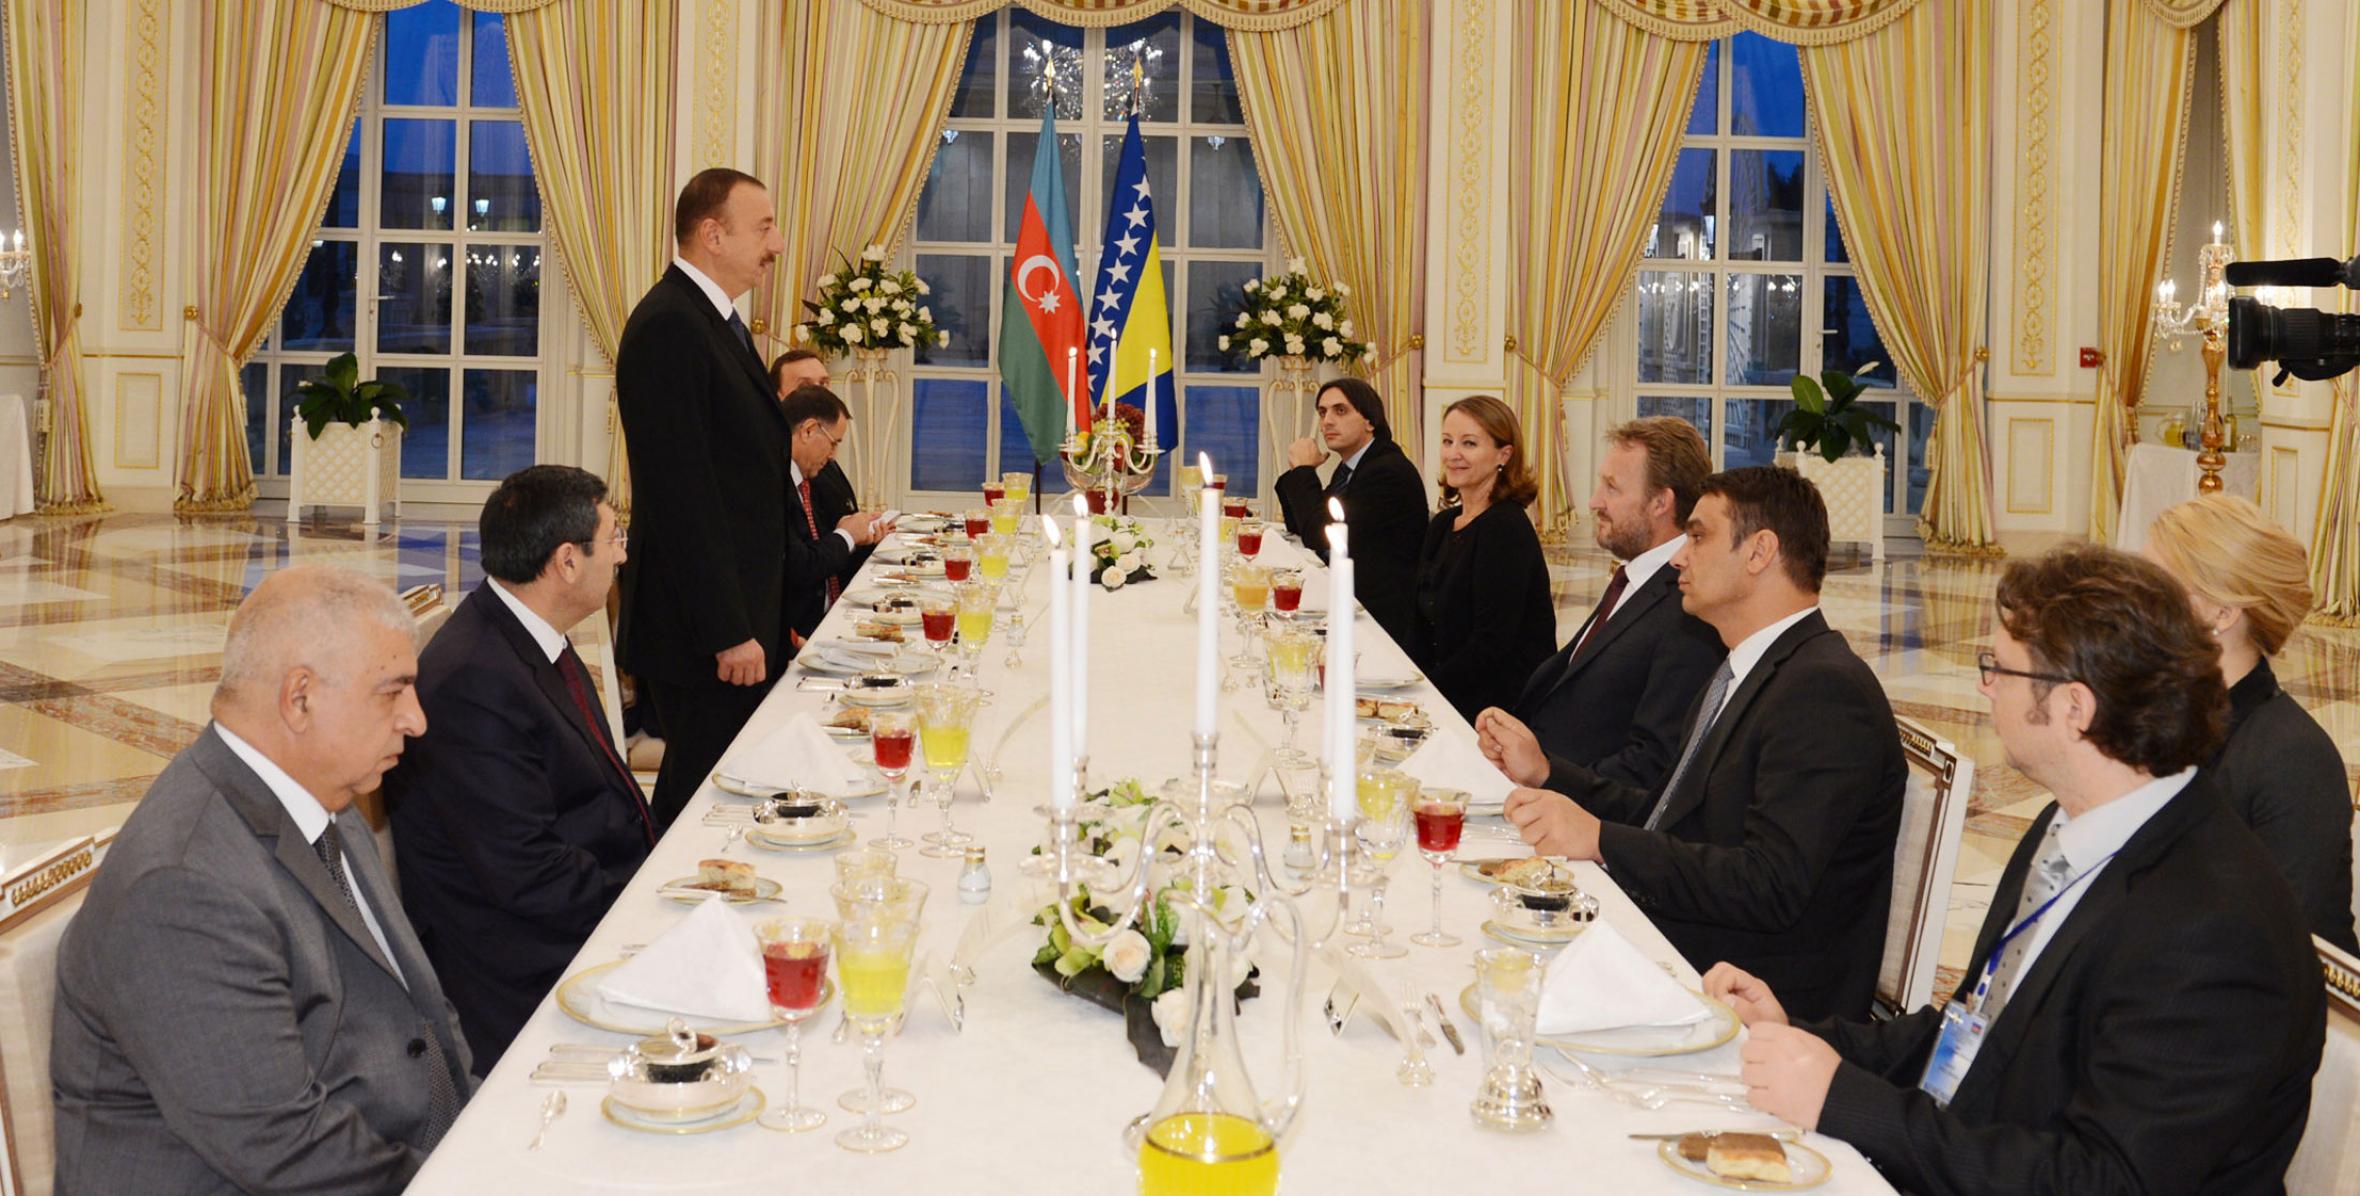 Official reception was hosted in honor of Chairman of the Presidency of Bosnia and Herzegovina Bakir Izetbegovic